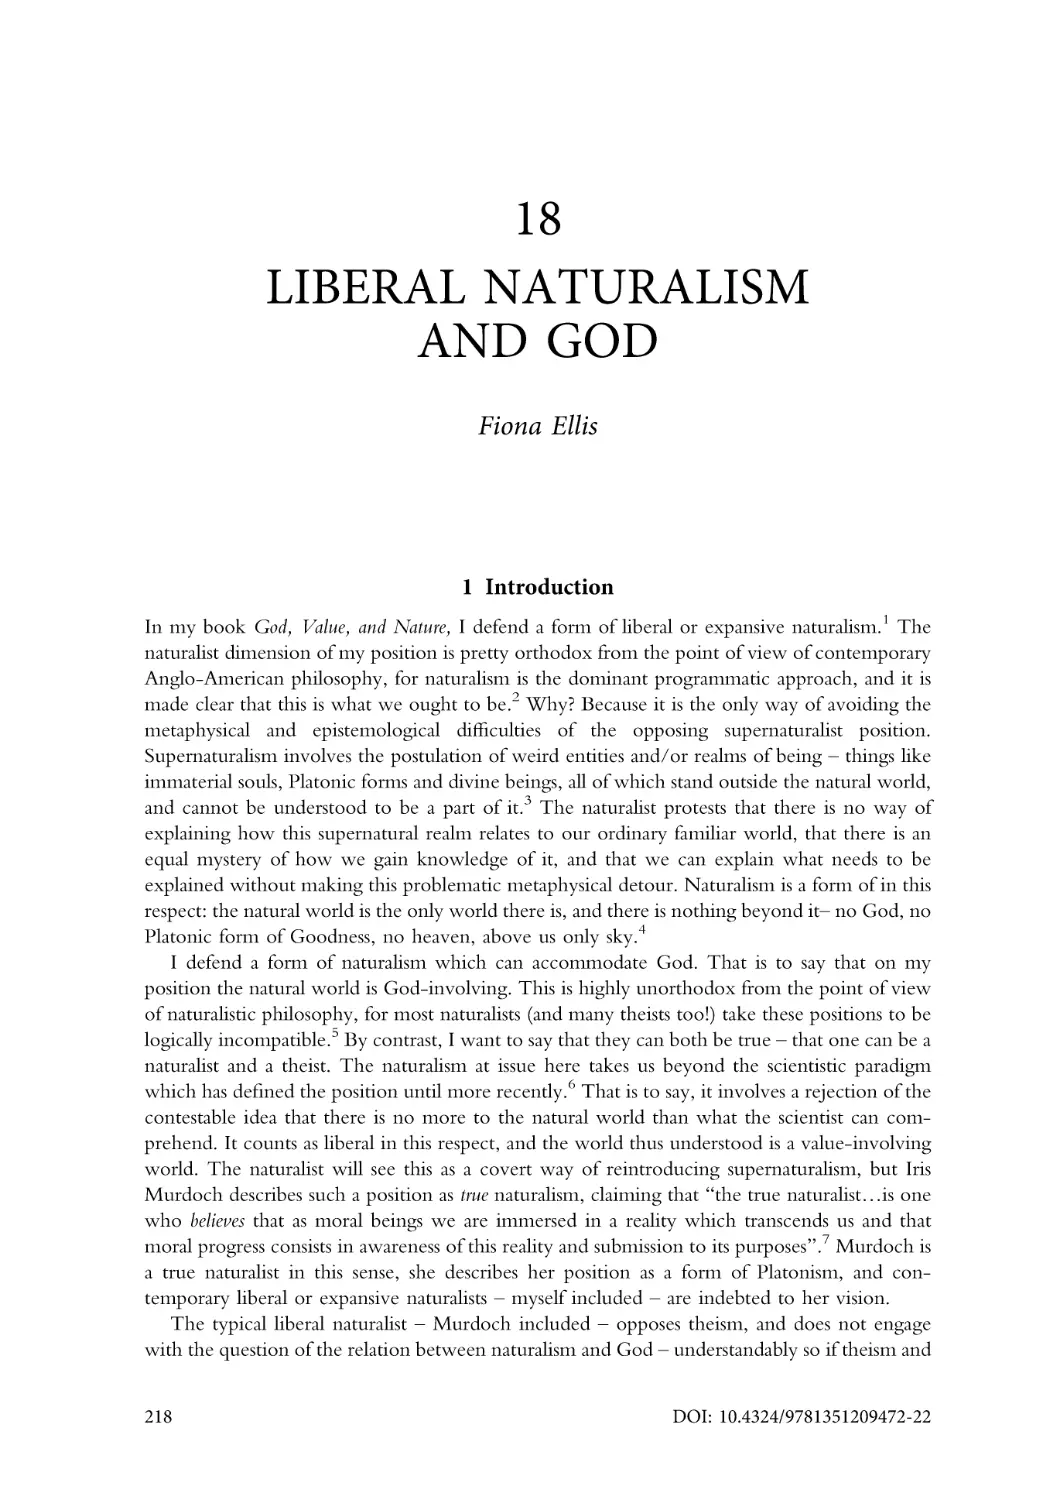 18. Liberal naturalism and God
1. Introduction